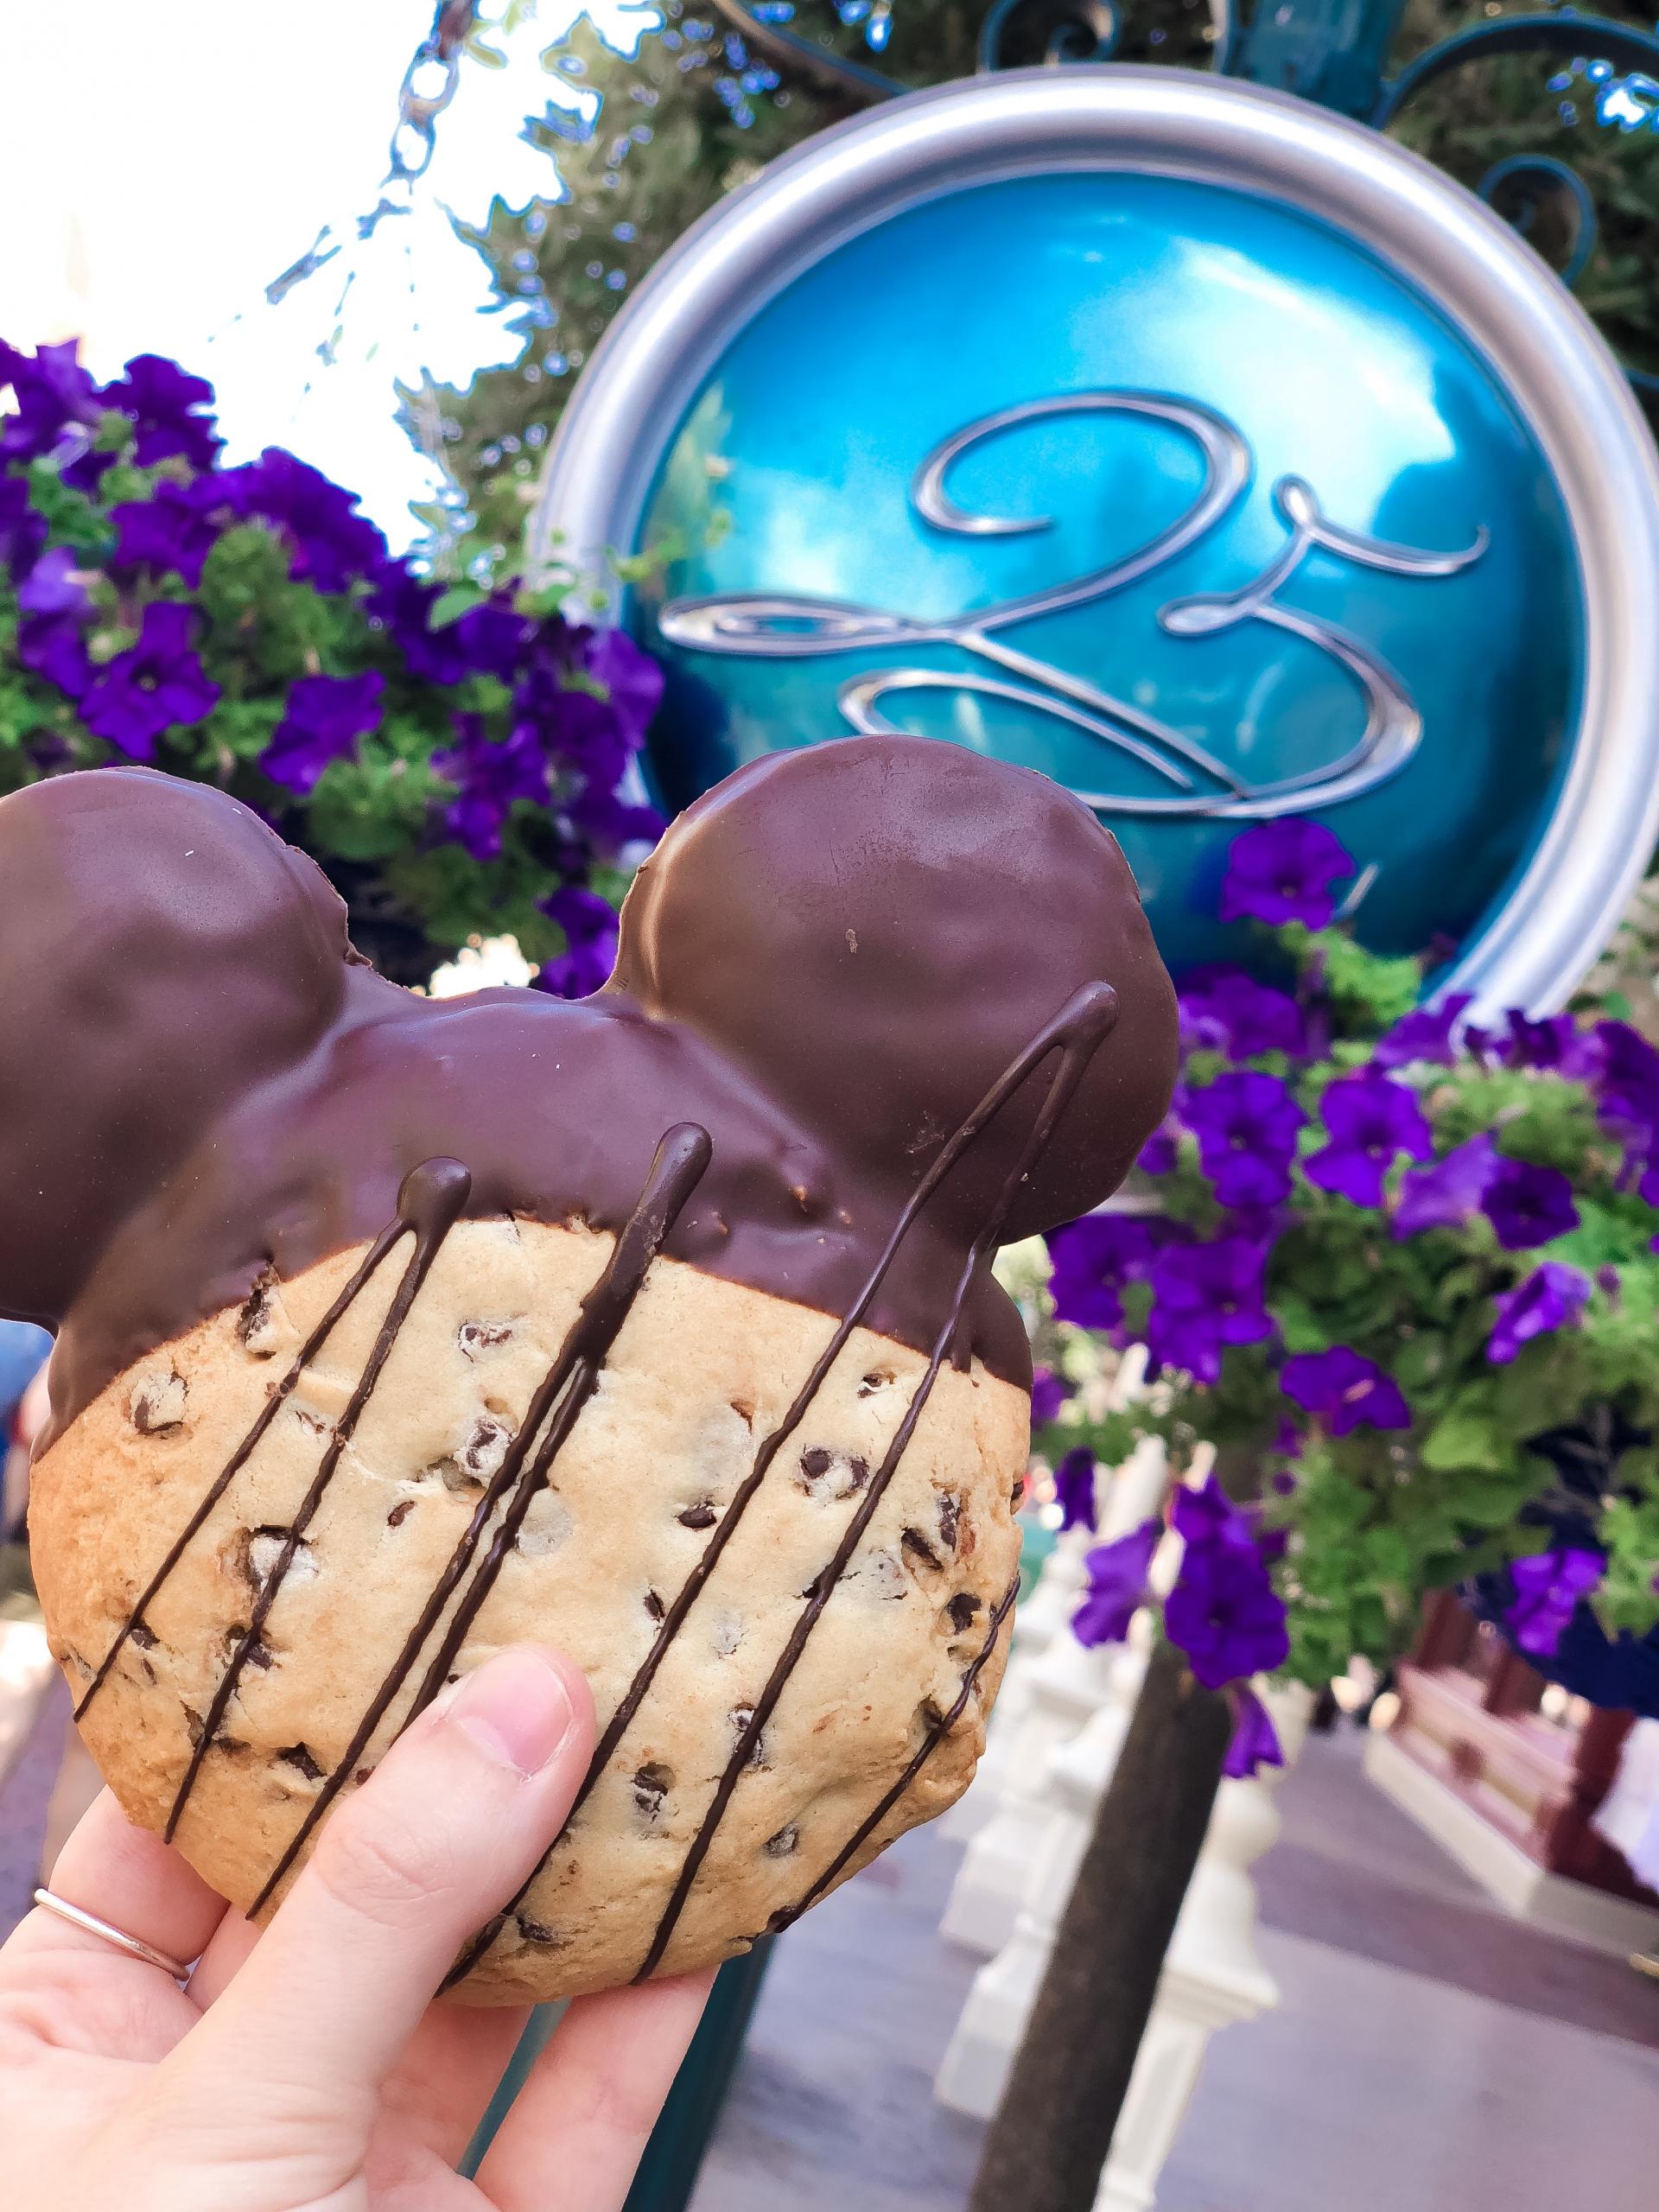 Nutella cookie at Disneyland Paris for first-timers